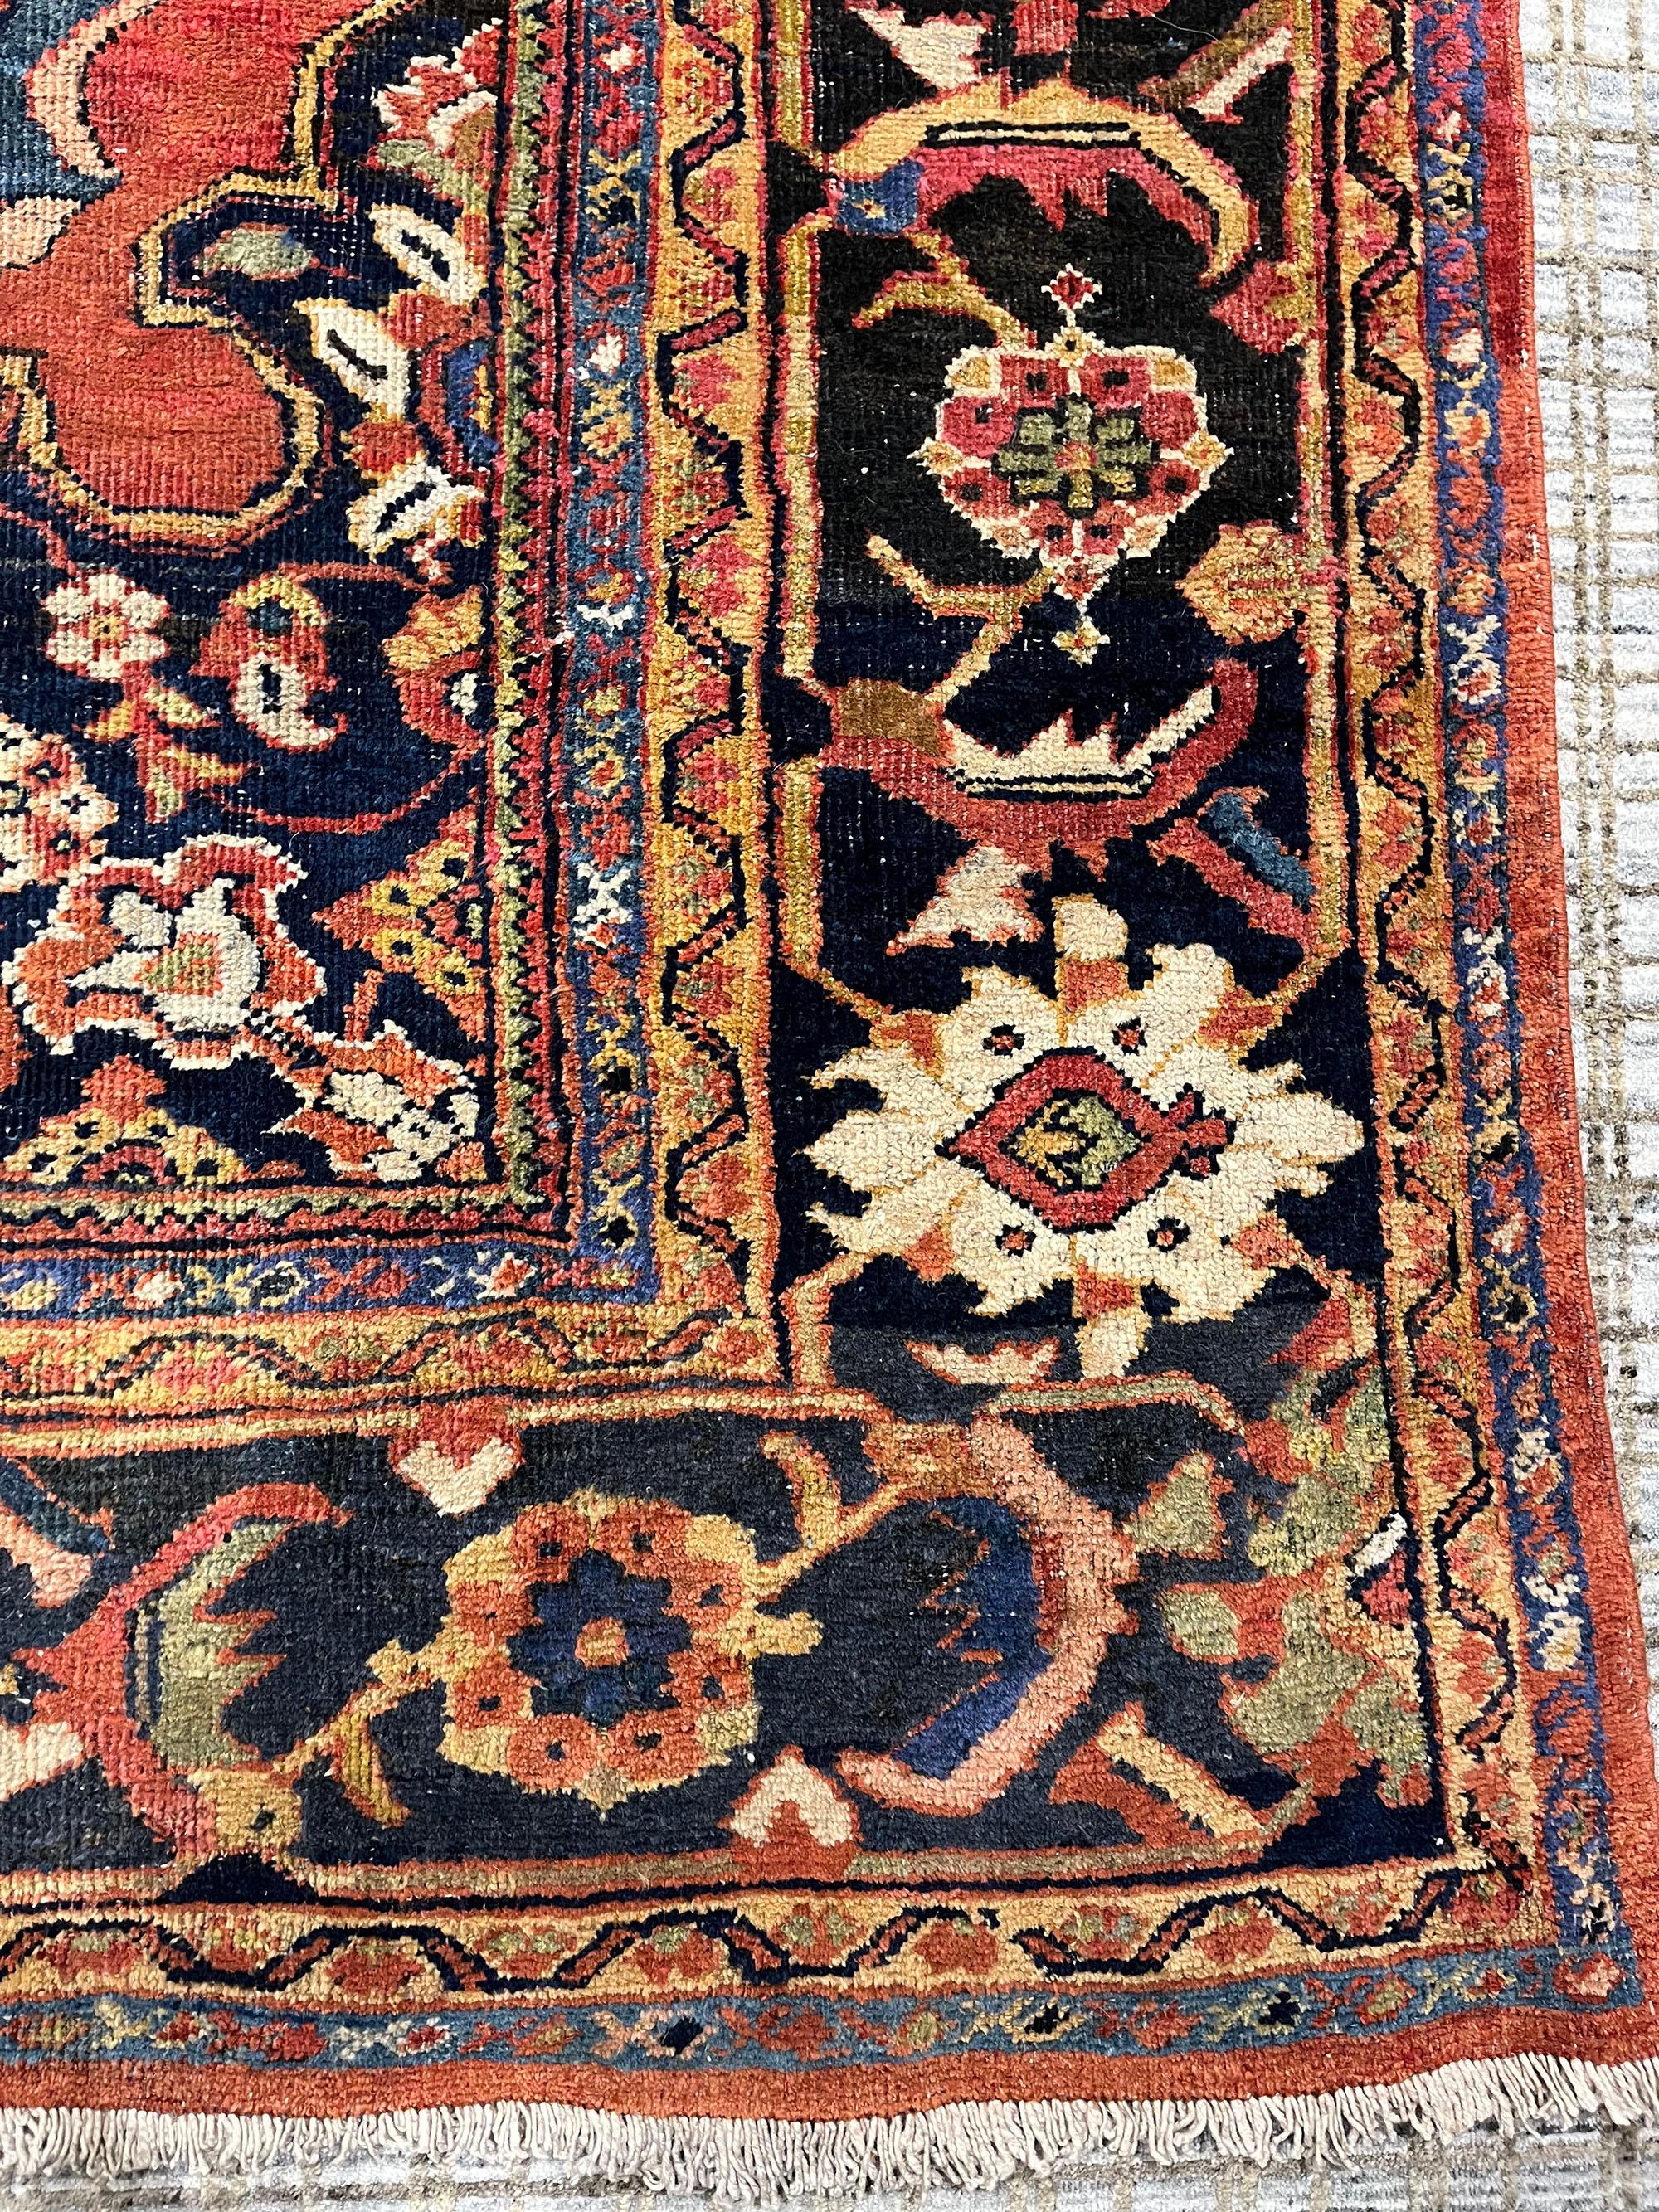 Antique Persian Mahal rug, 9'2 x 12'9. This excellent piece is in great condition and would make a wonderful accent piece to a formal living room, dining room or library. Mahal means many things in the rug world. The antique Persian carpets from the